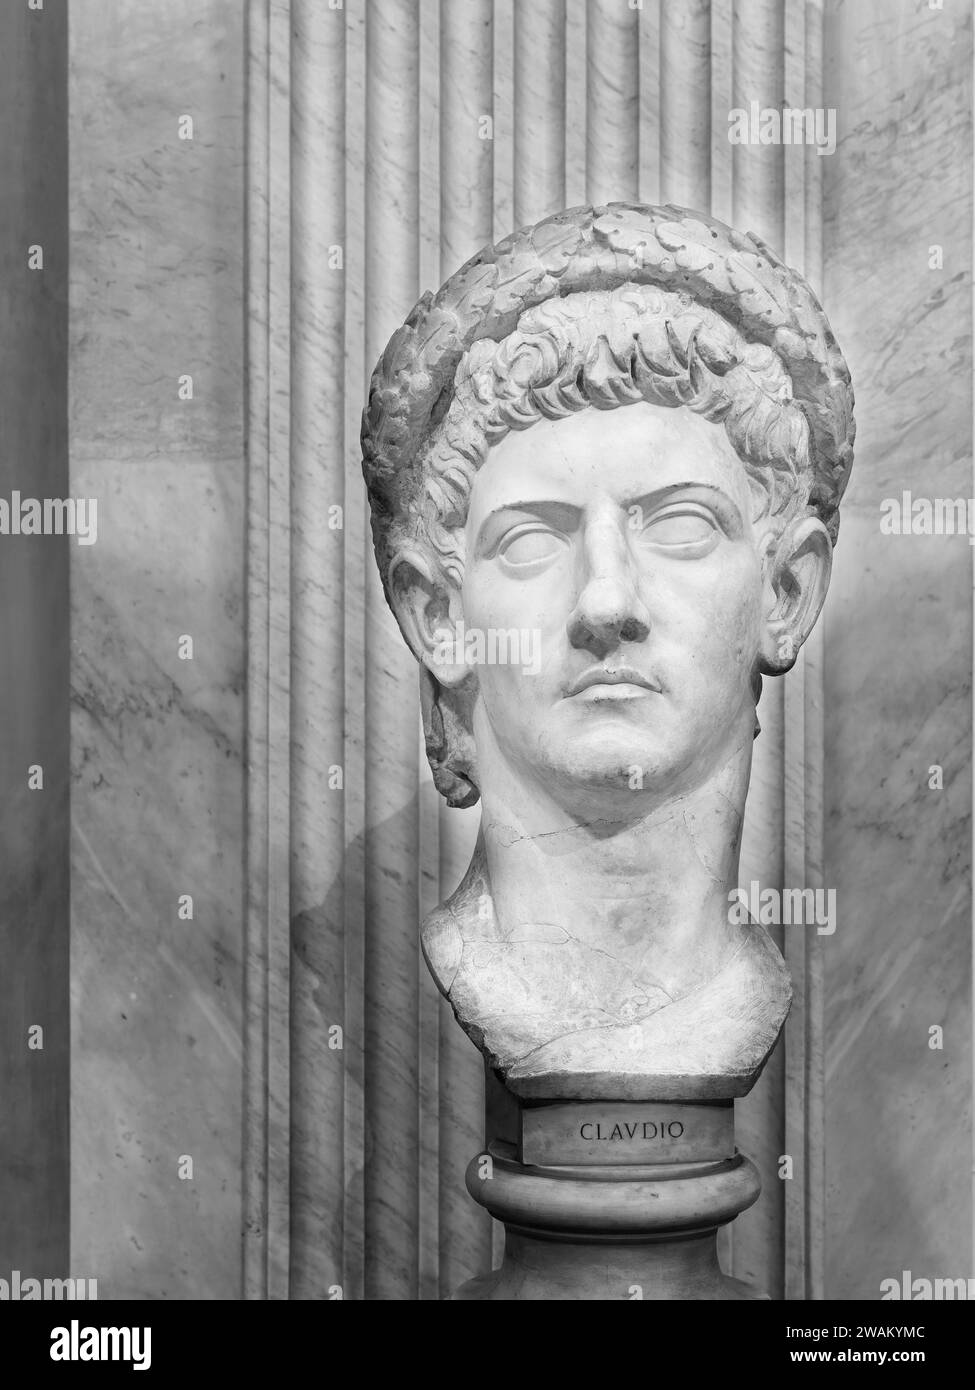 Bust of the Emperor Claudius, ruler of the roman empire, died 138 AD; Vatican museum, Rome, Italy. Stock Photo